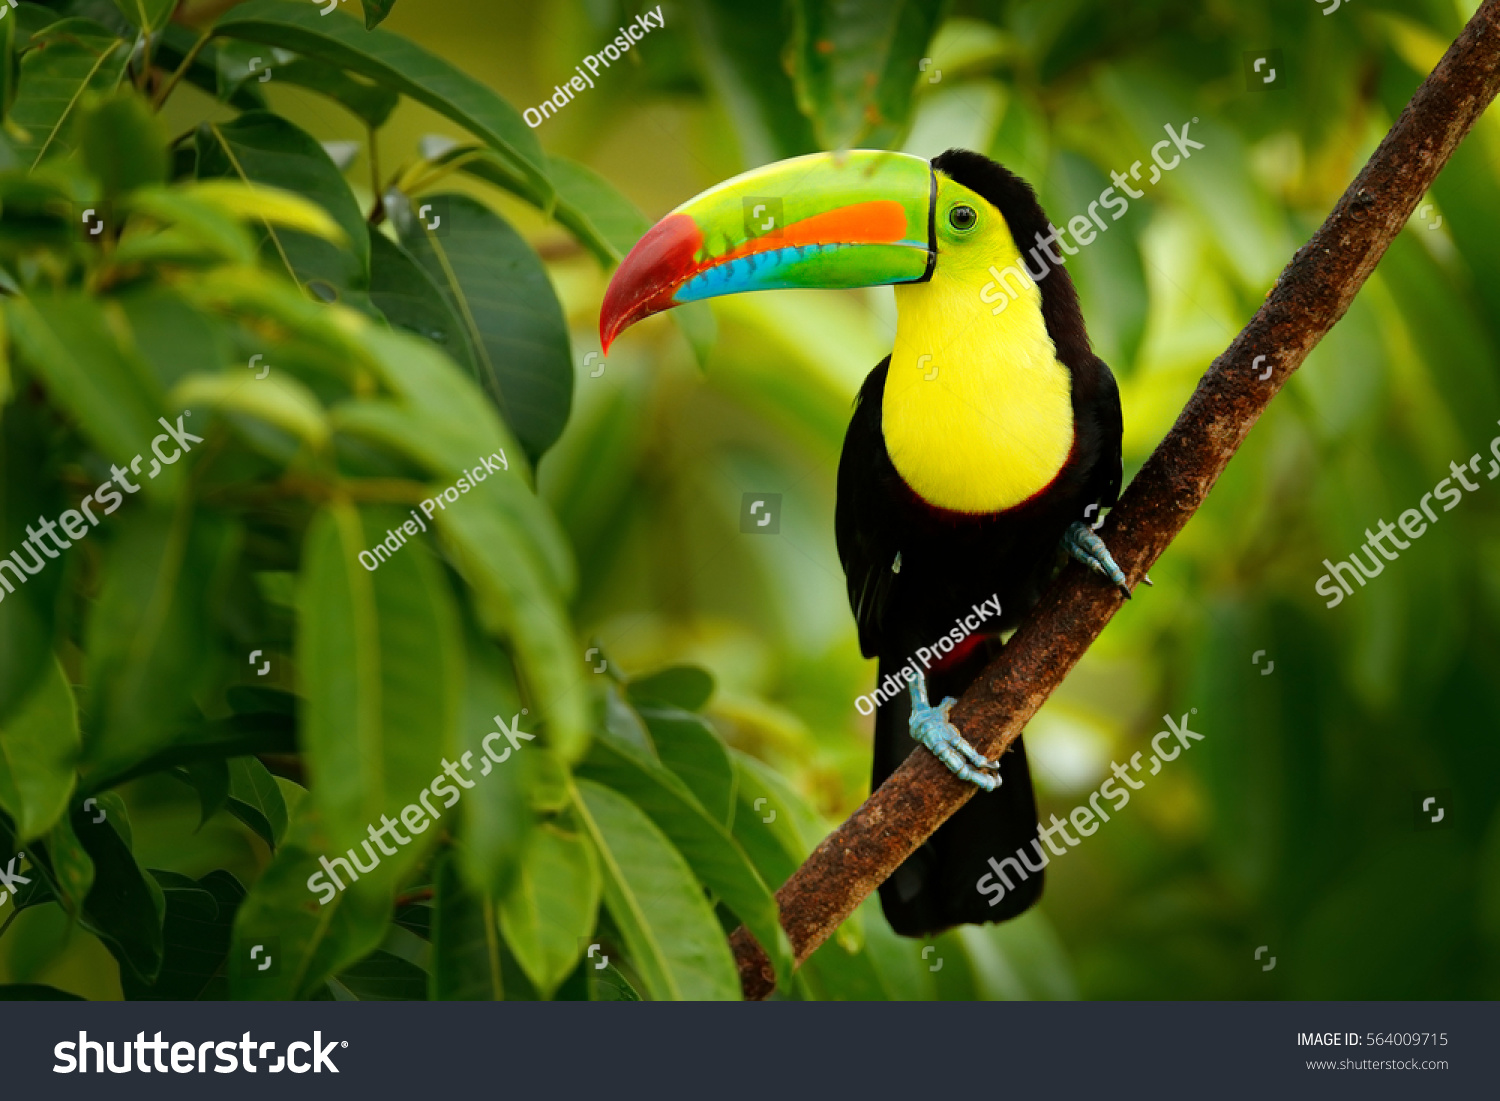 Keel-billed Toucan, Ramphastos sulfuratus, bird with big bill sitting on the branch in the forest, Boca Tapada, green vegetation, Costa Rica. Nature travel in central America. #564009715